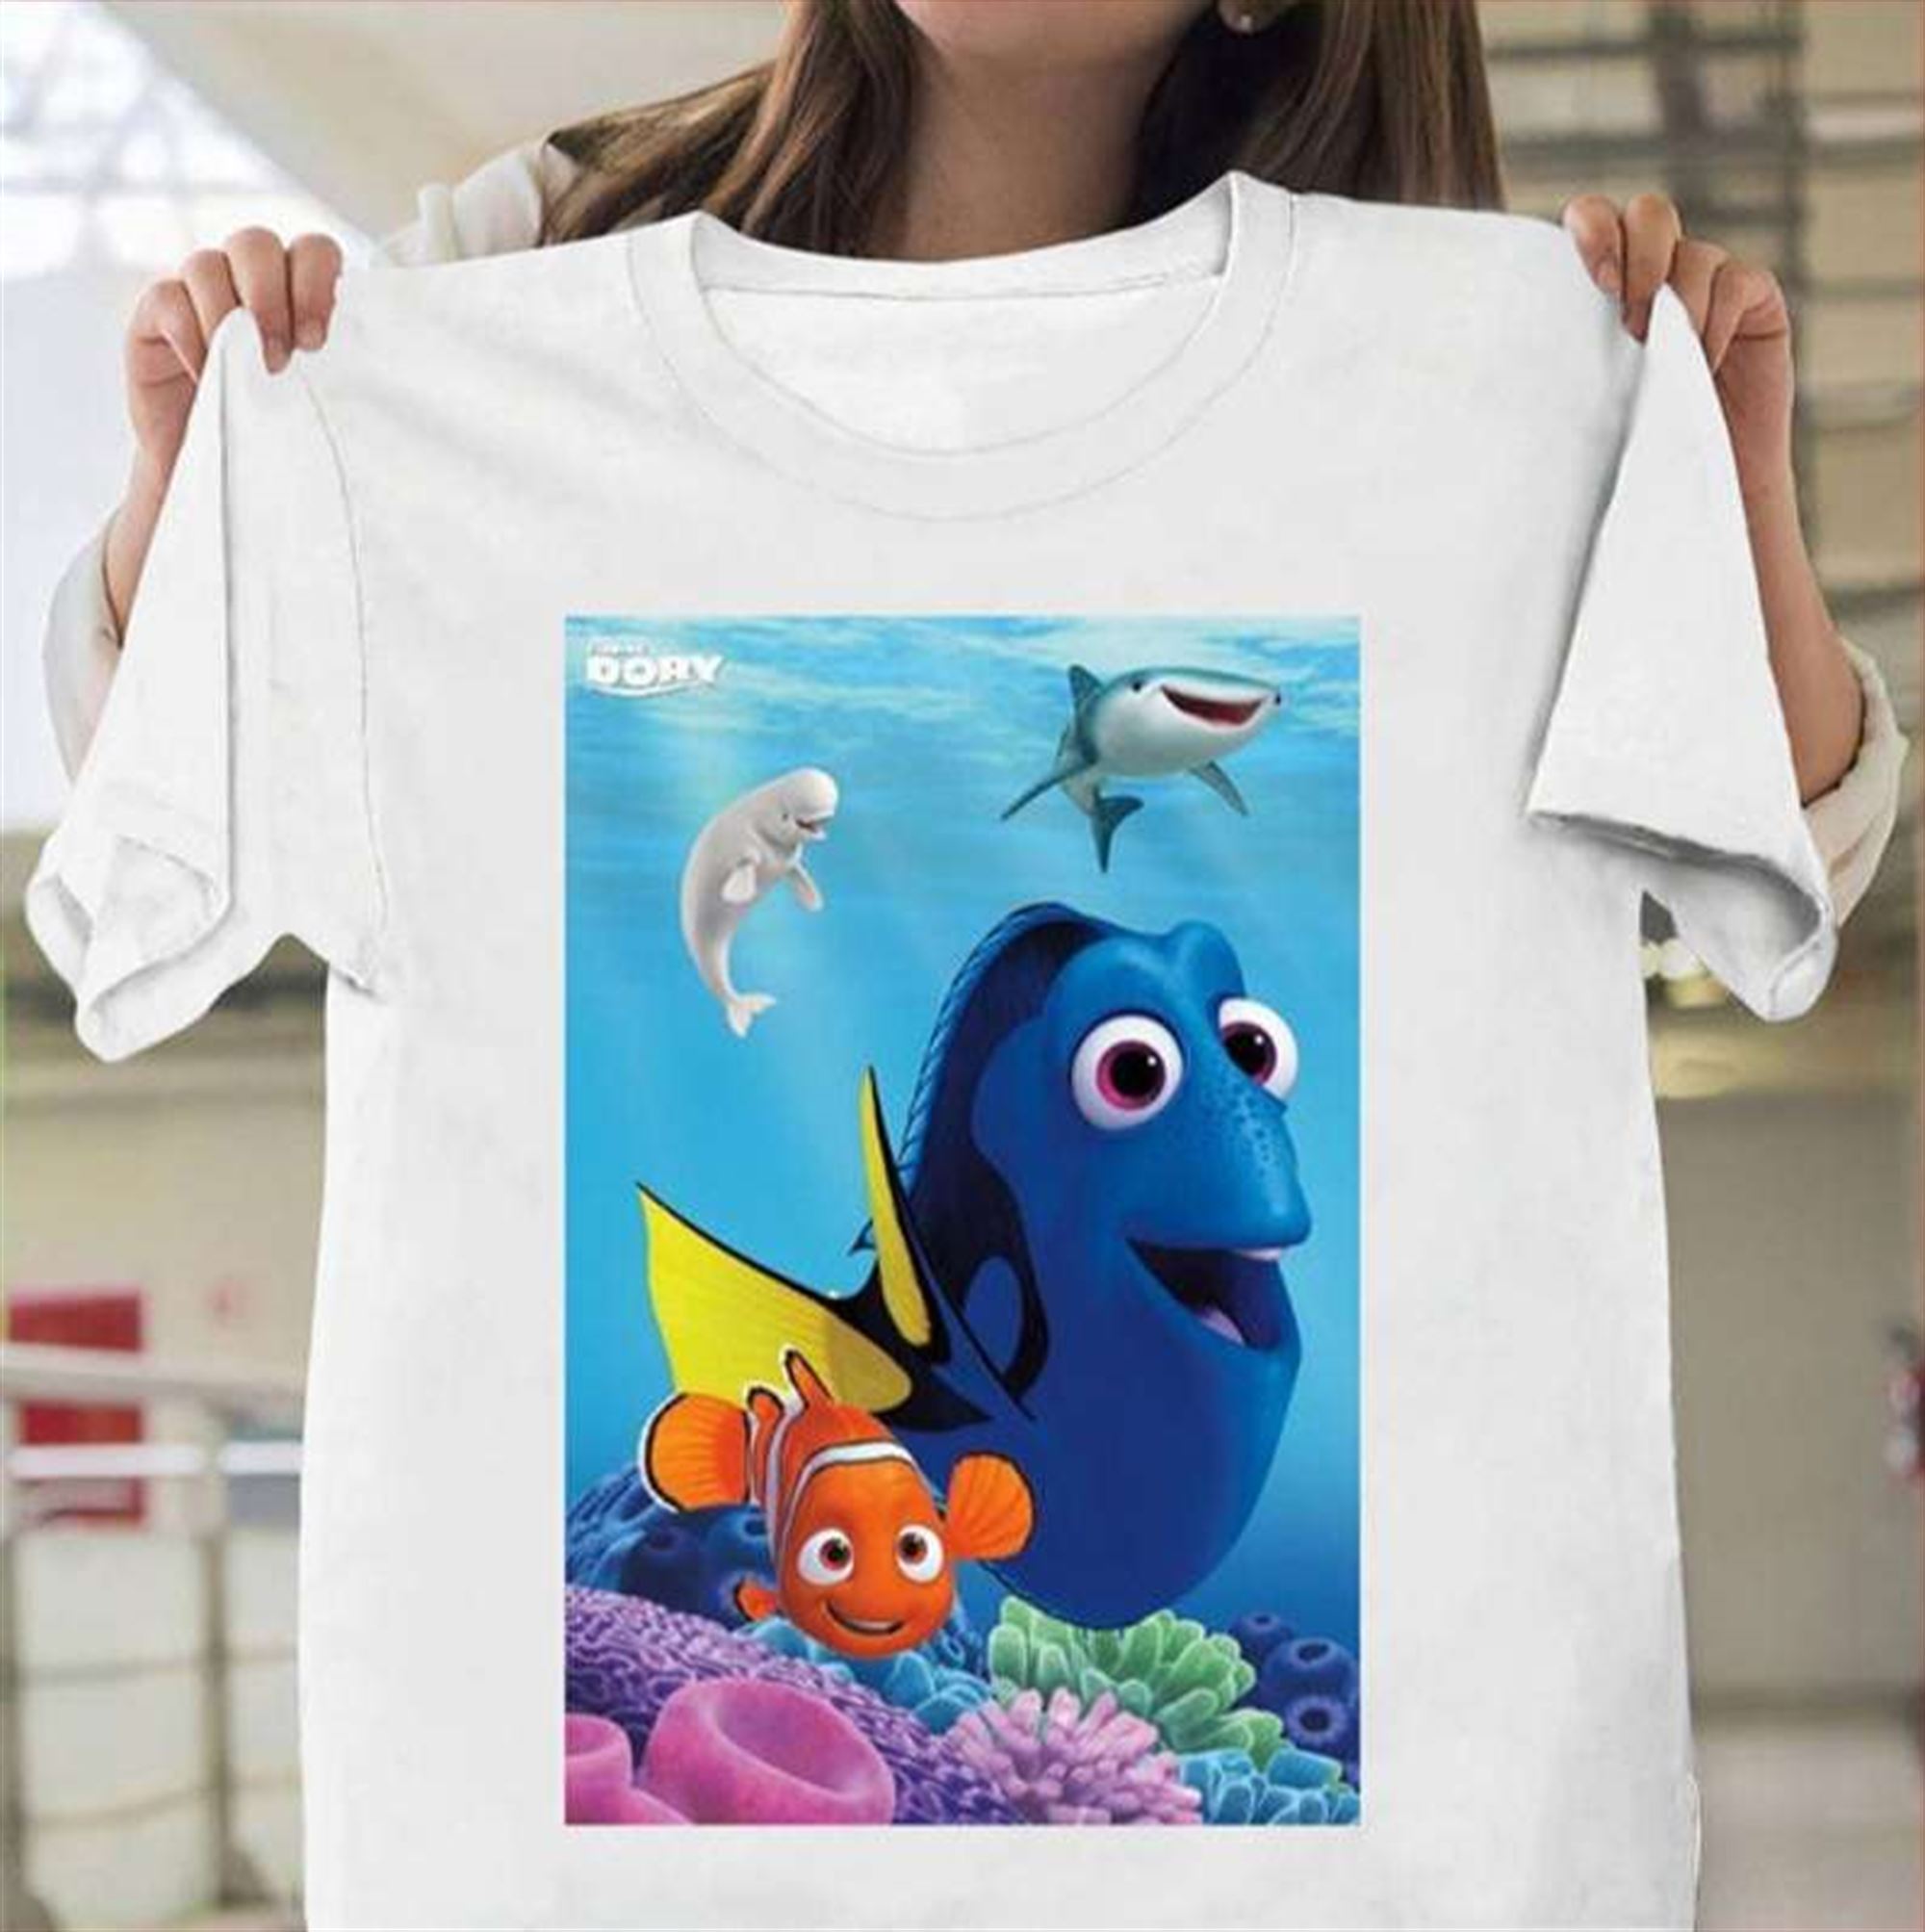 Finding Dory Unisex T Shirt Plus Size Up To 5x